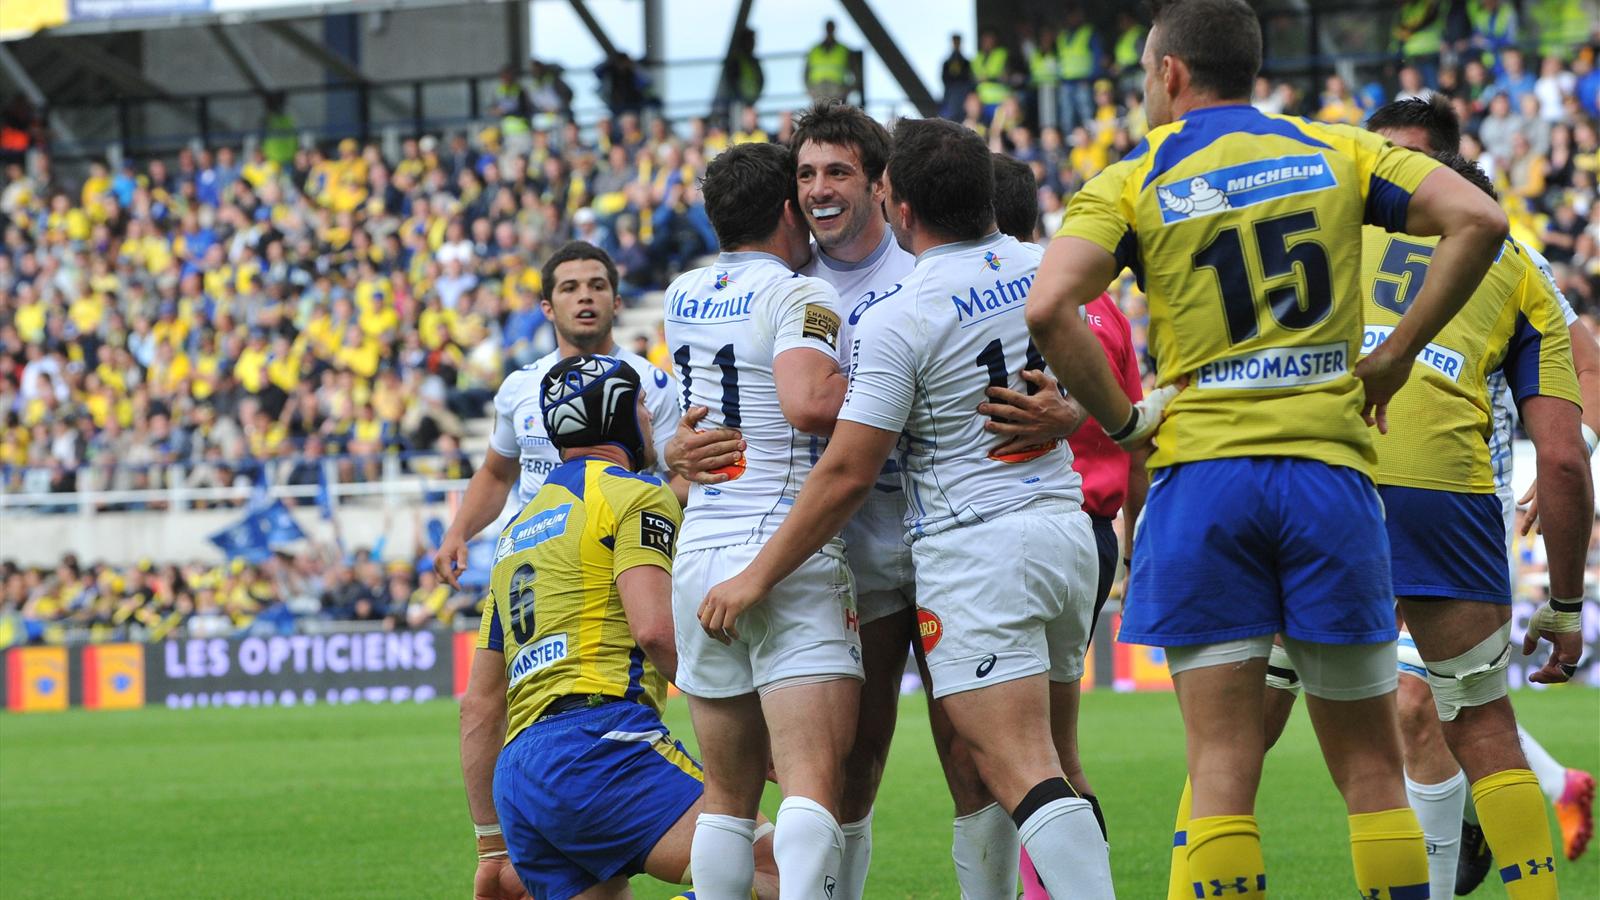 Rugby Top 14 La Rochelle Castres Olympique en direct streaming live